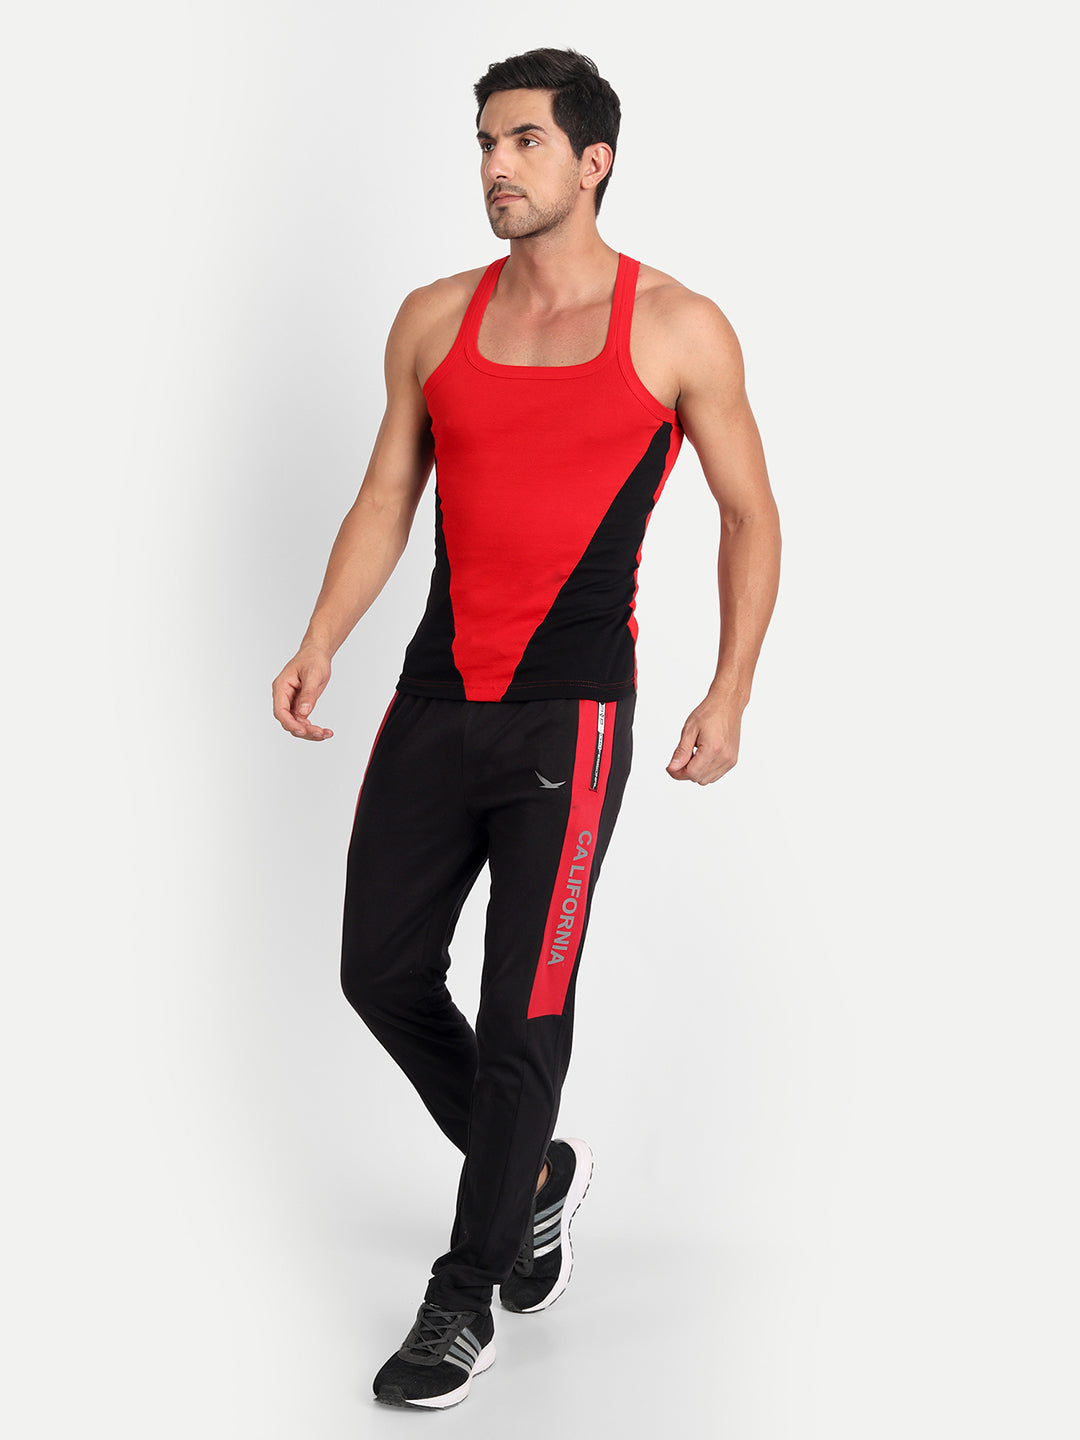 Generic Track Pants For Men's @ Best Price Online | Jumia Egypt